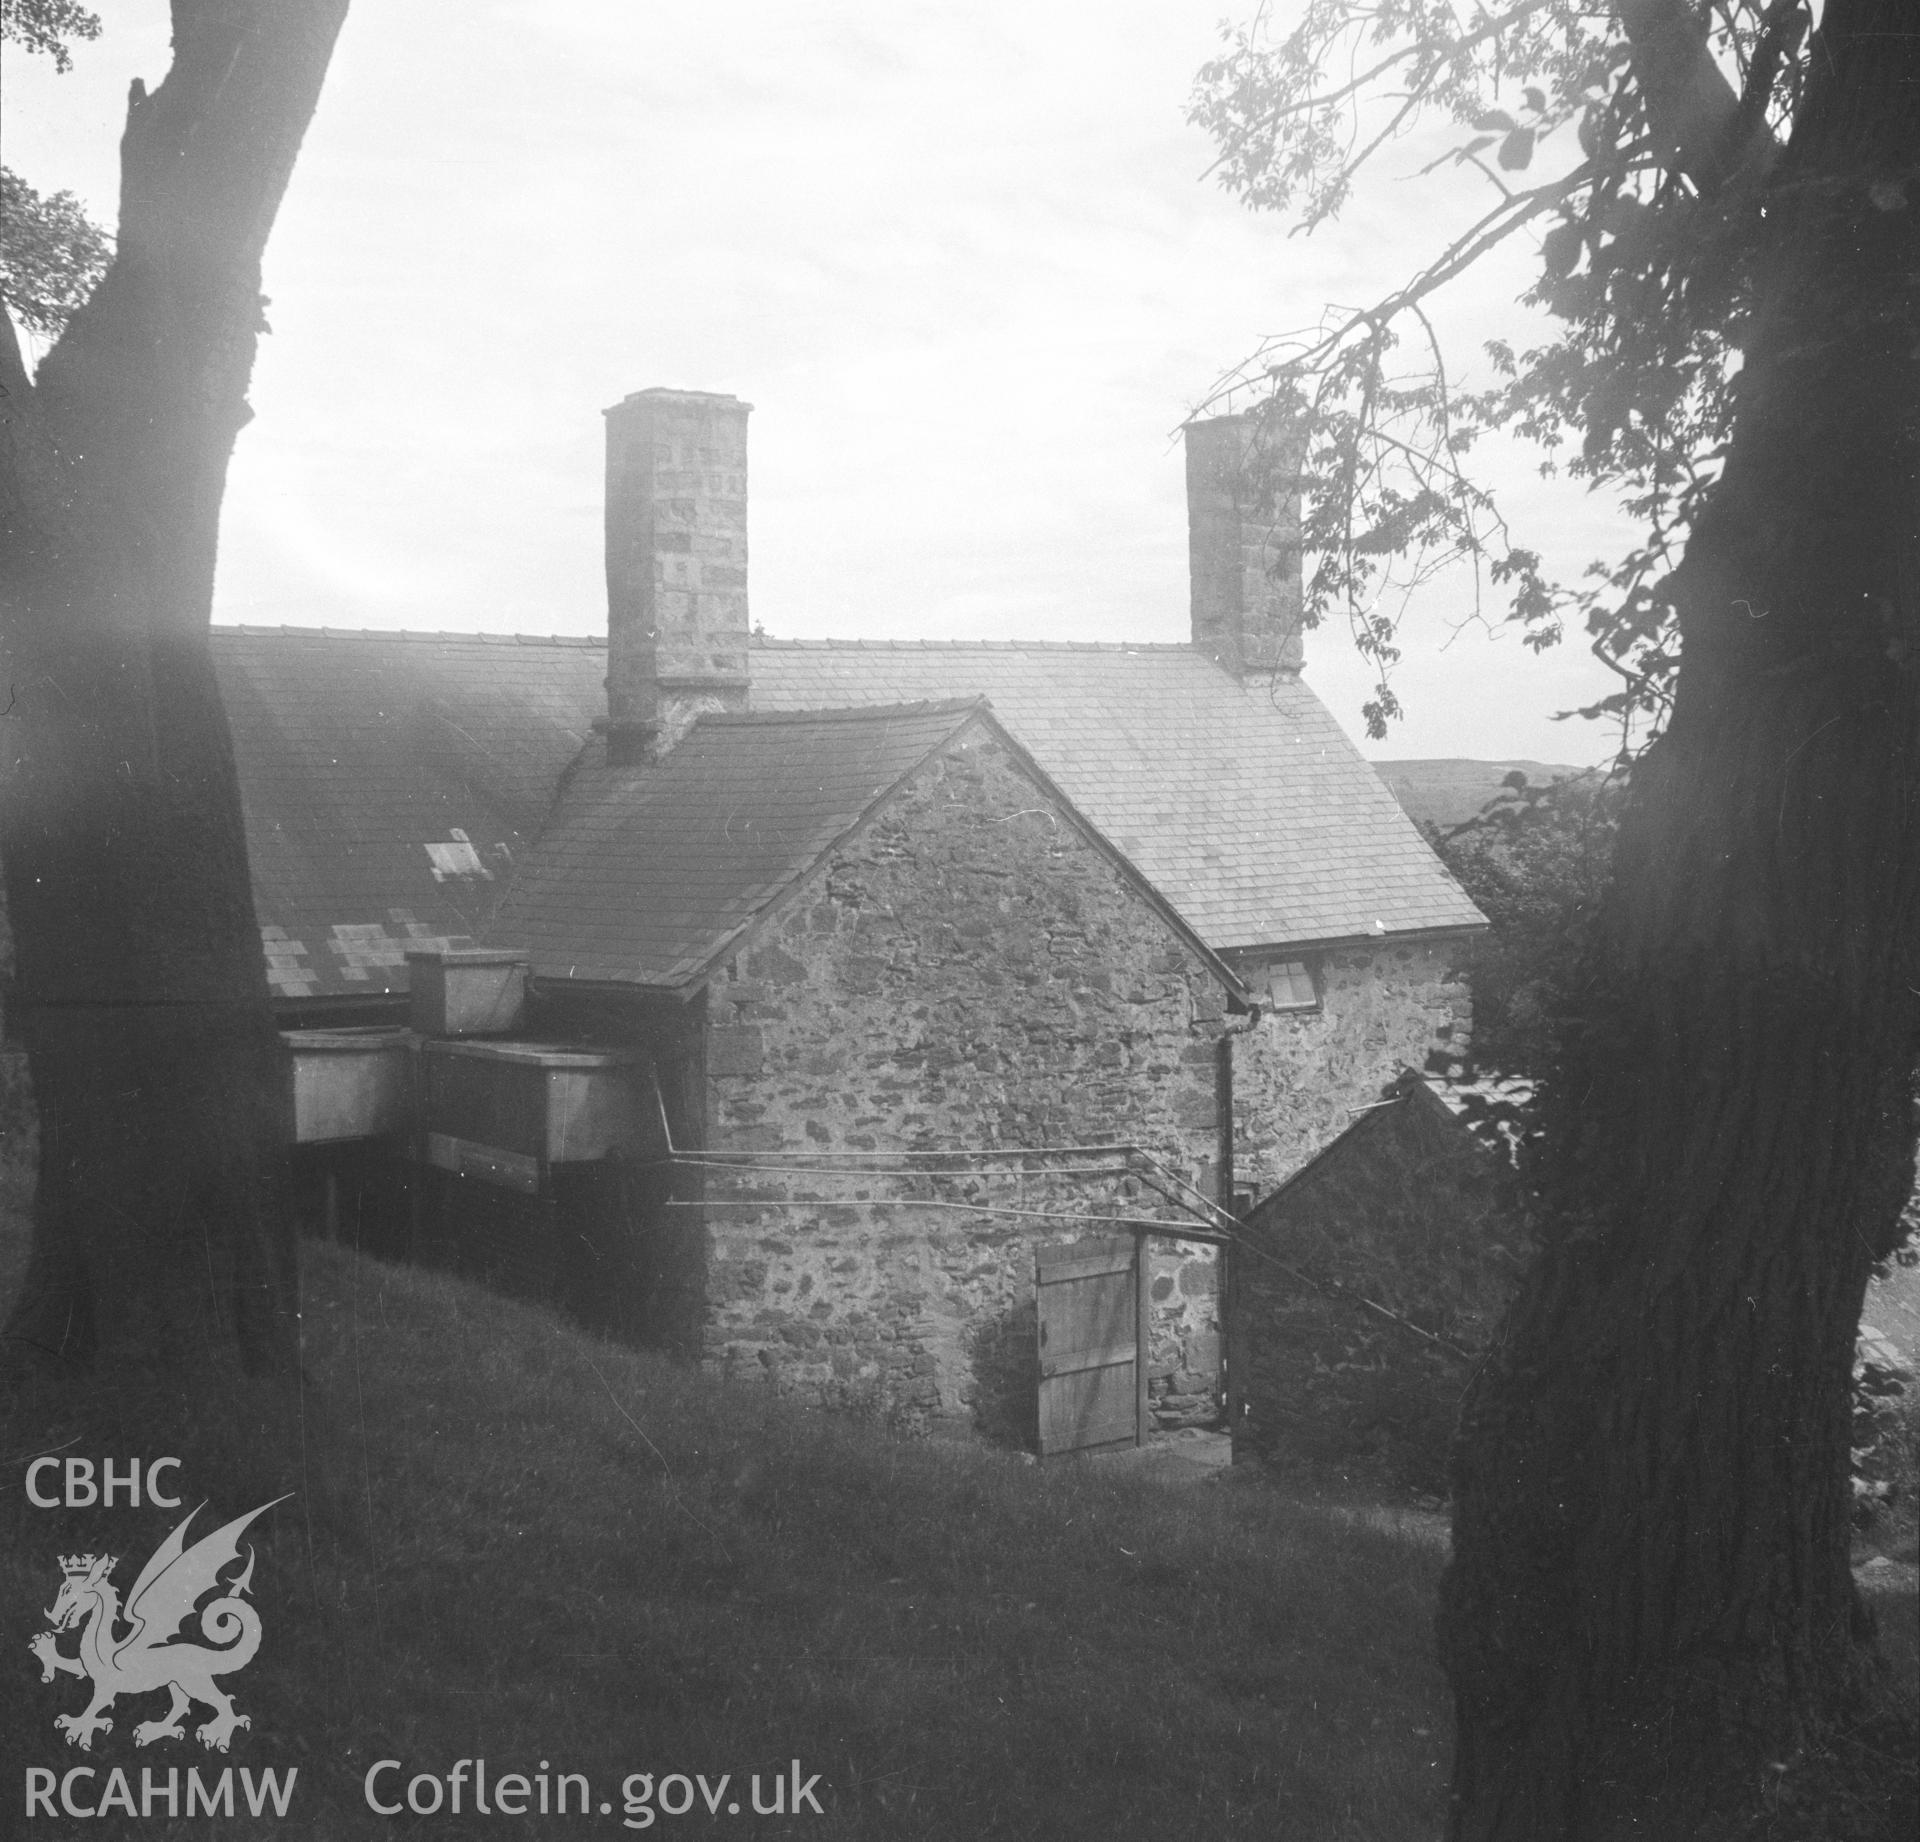 Black and white nitrate negative showing exterior view of  Brithdir Mawr, Flintshire.